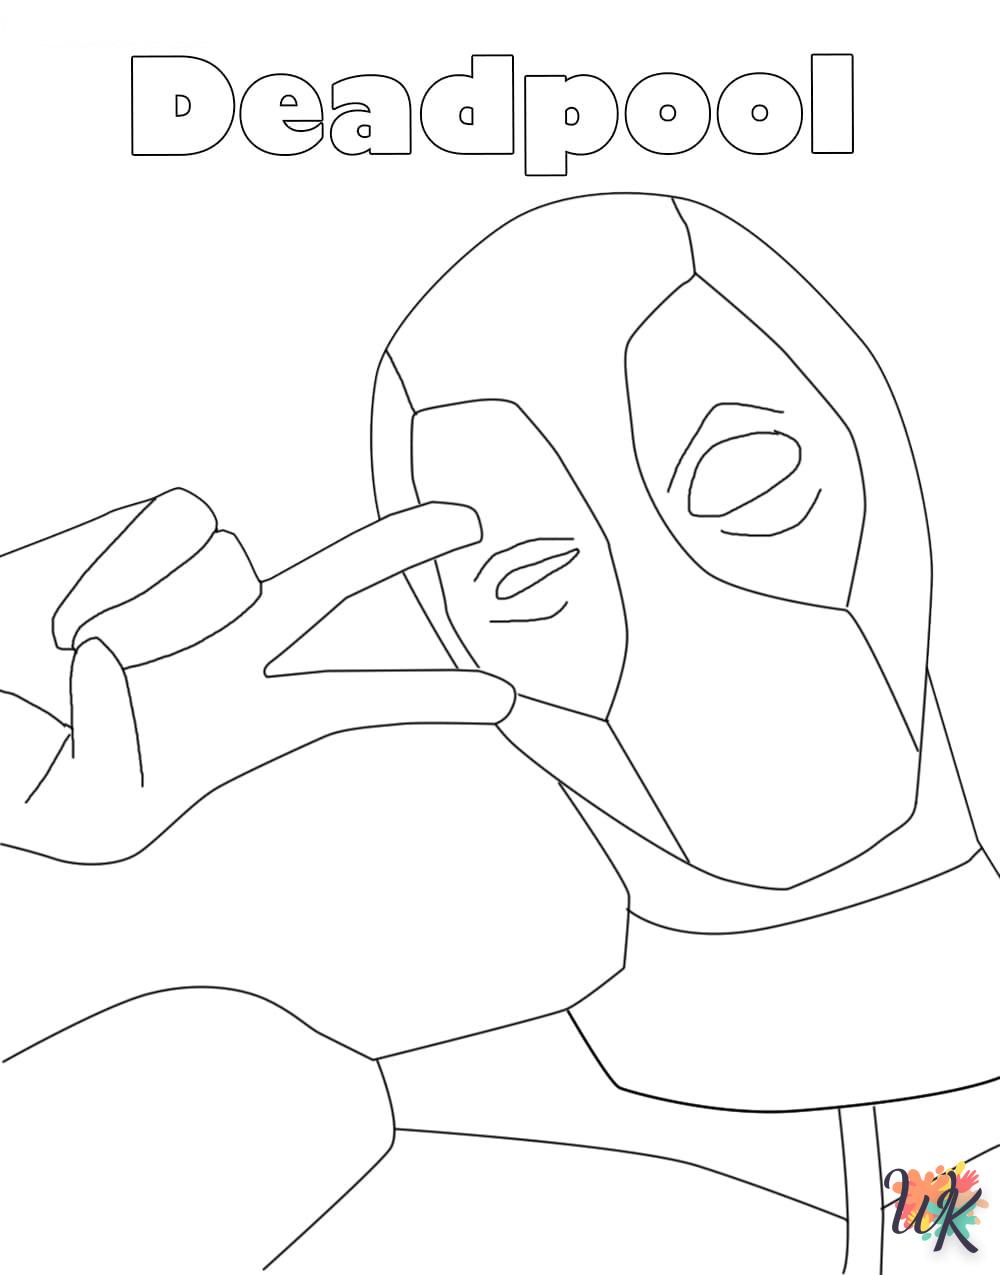 Deadpool ornaments coloring pages